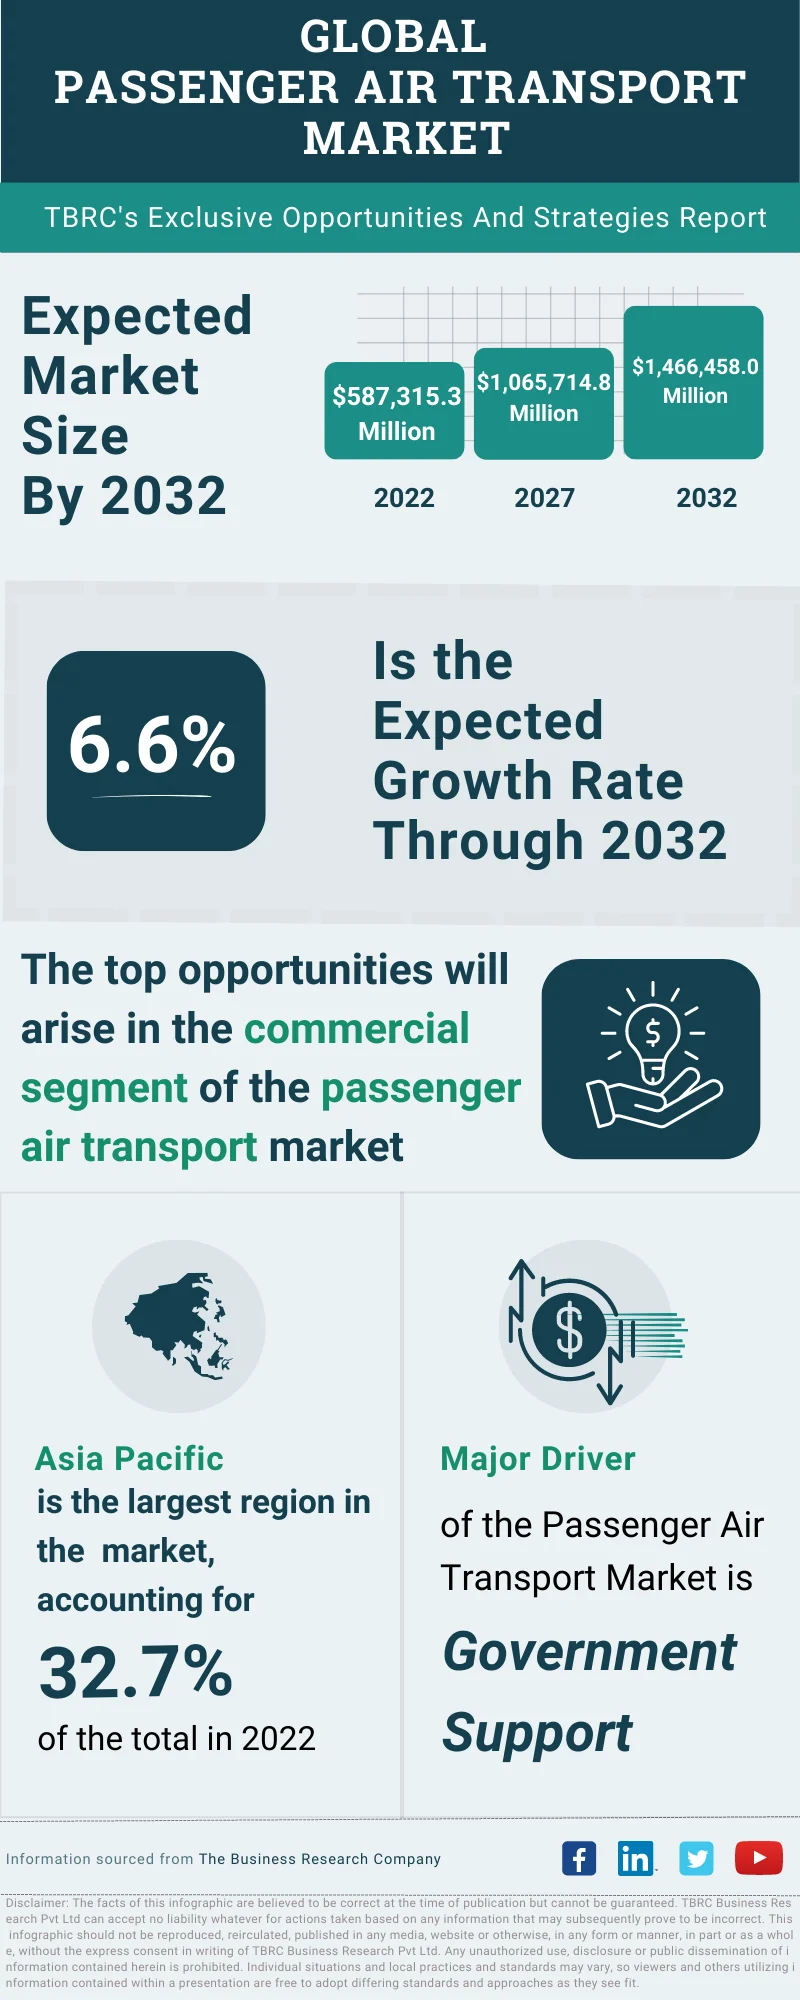 Passenger Air Transport Global Market Opportunities And Strategies To 2032